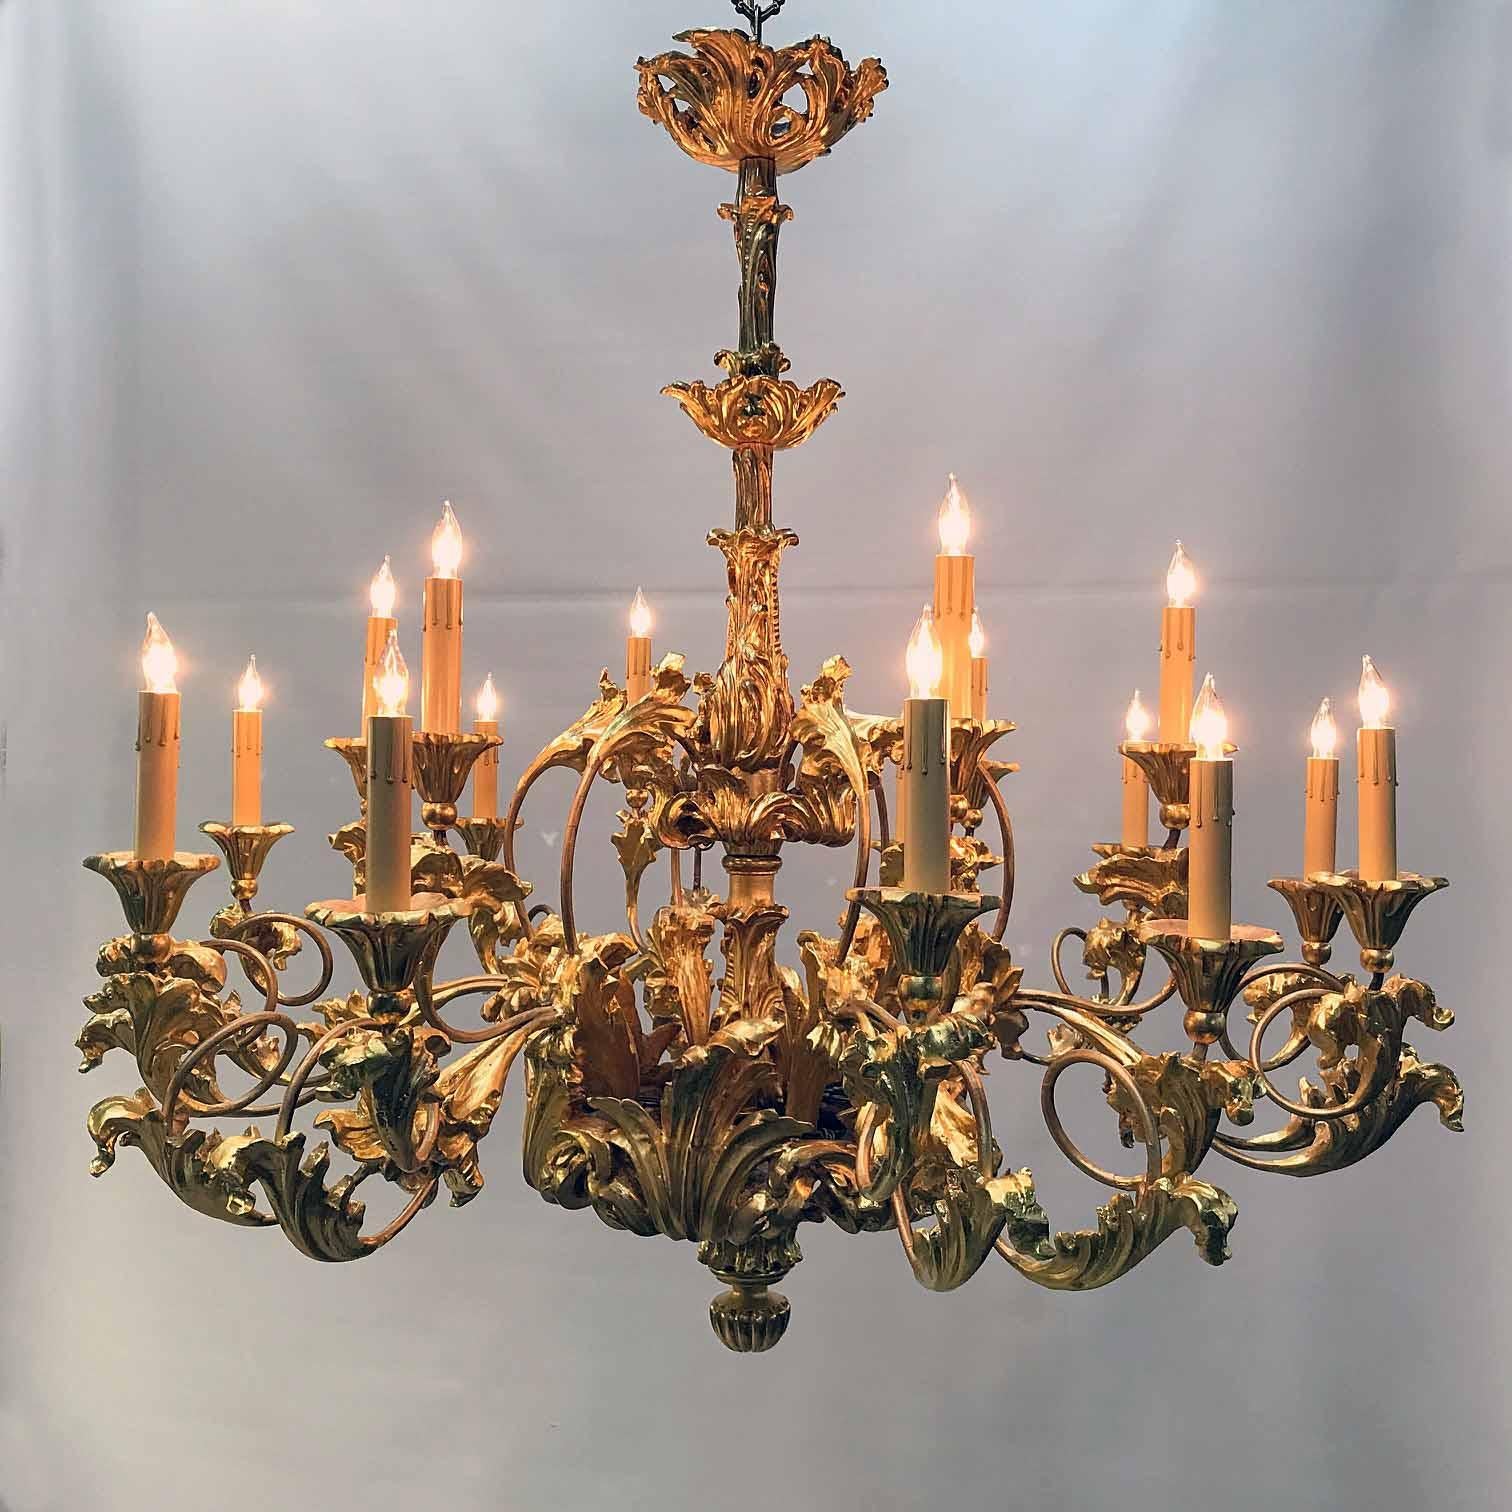 Rococo Revival 19th Century Louis XV Style Giltwood 18-Light Chandelier For Sale